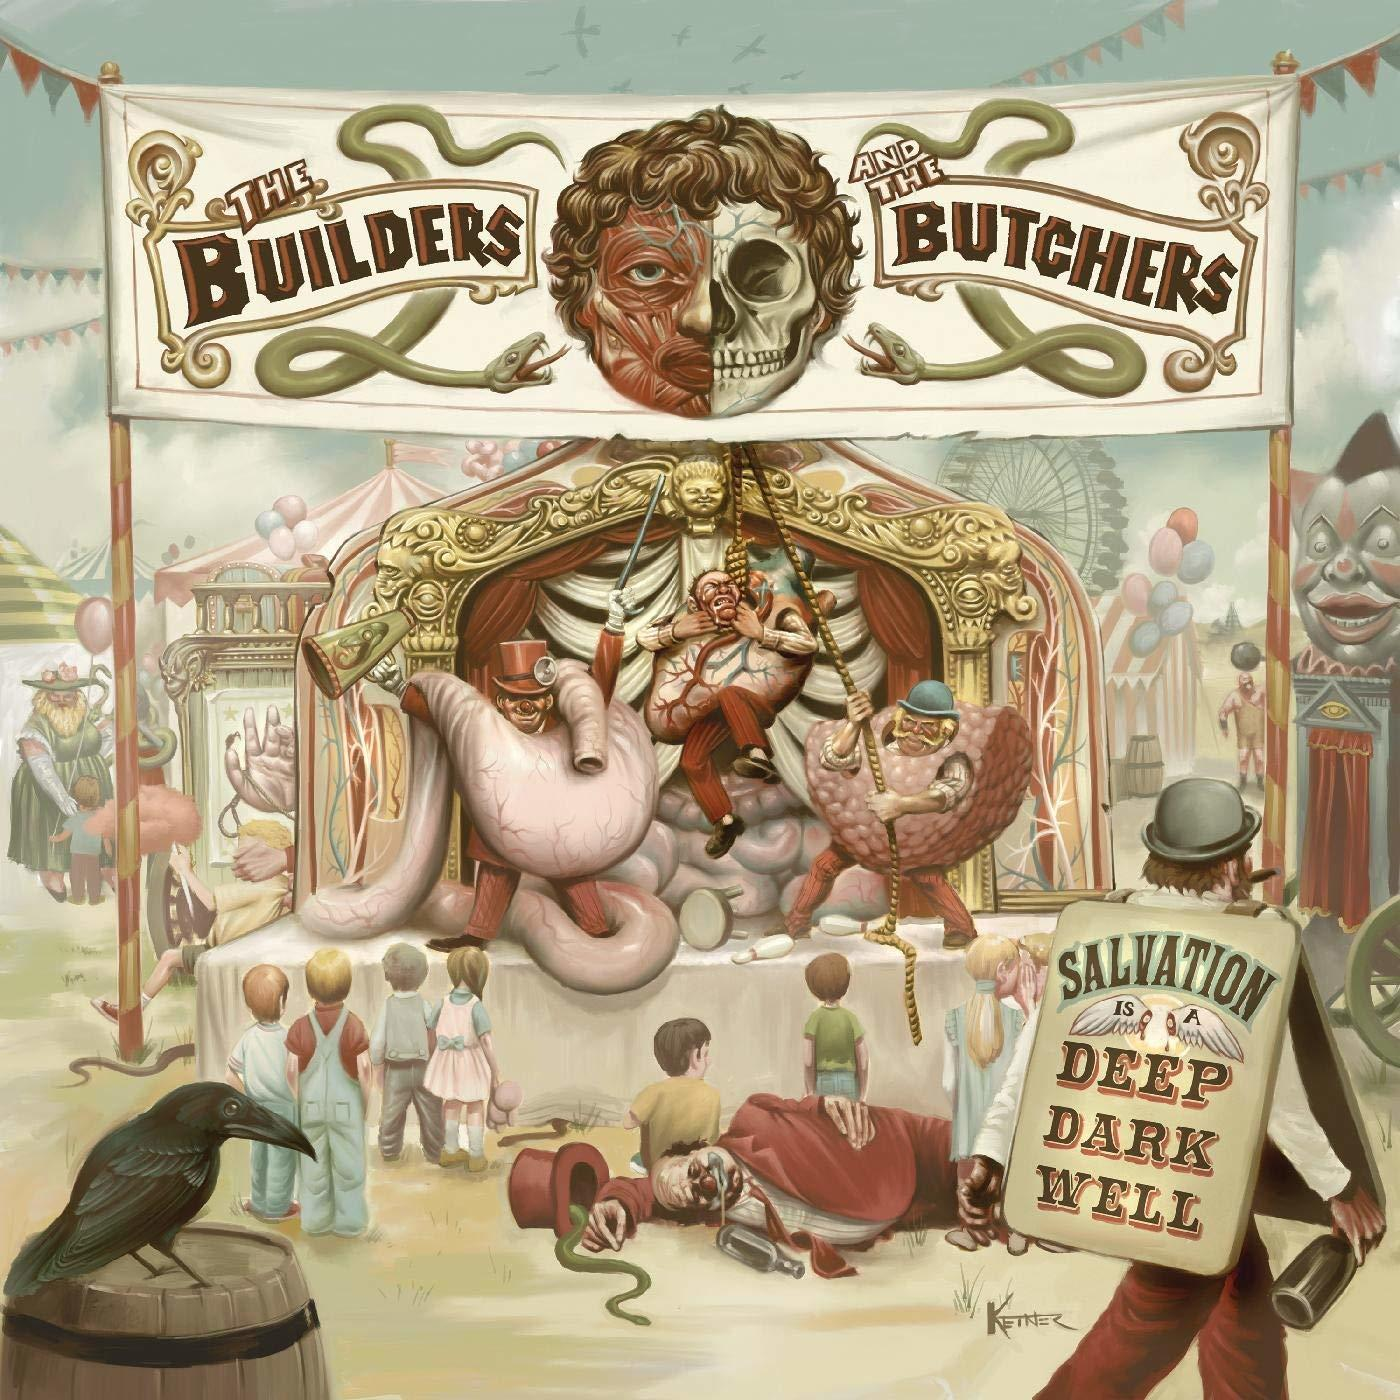 A DARK Builders (Vinyl) - - The SALVATION The WELL DEEP Butchers And IS